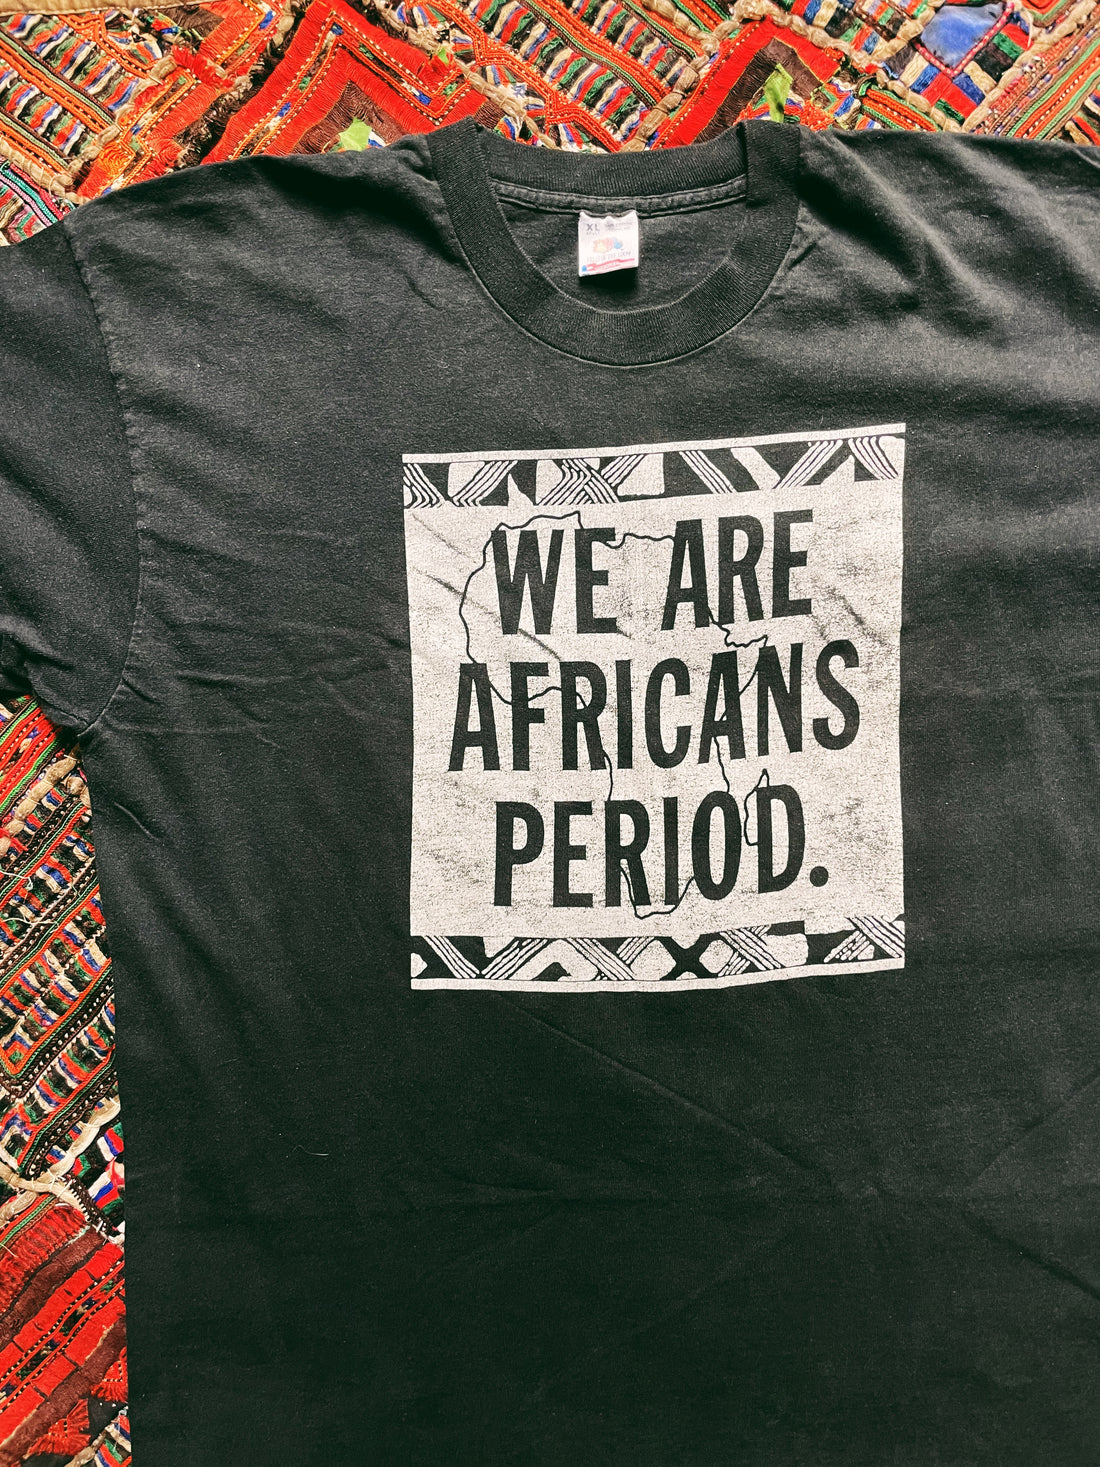 Vintage “We Are Africans Period” T-Shirt (1990’s)